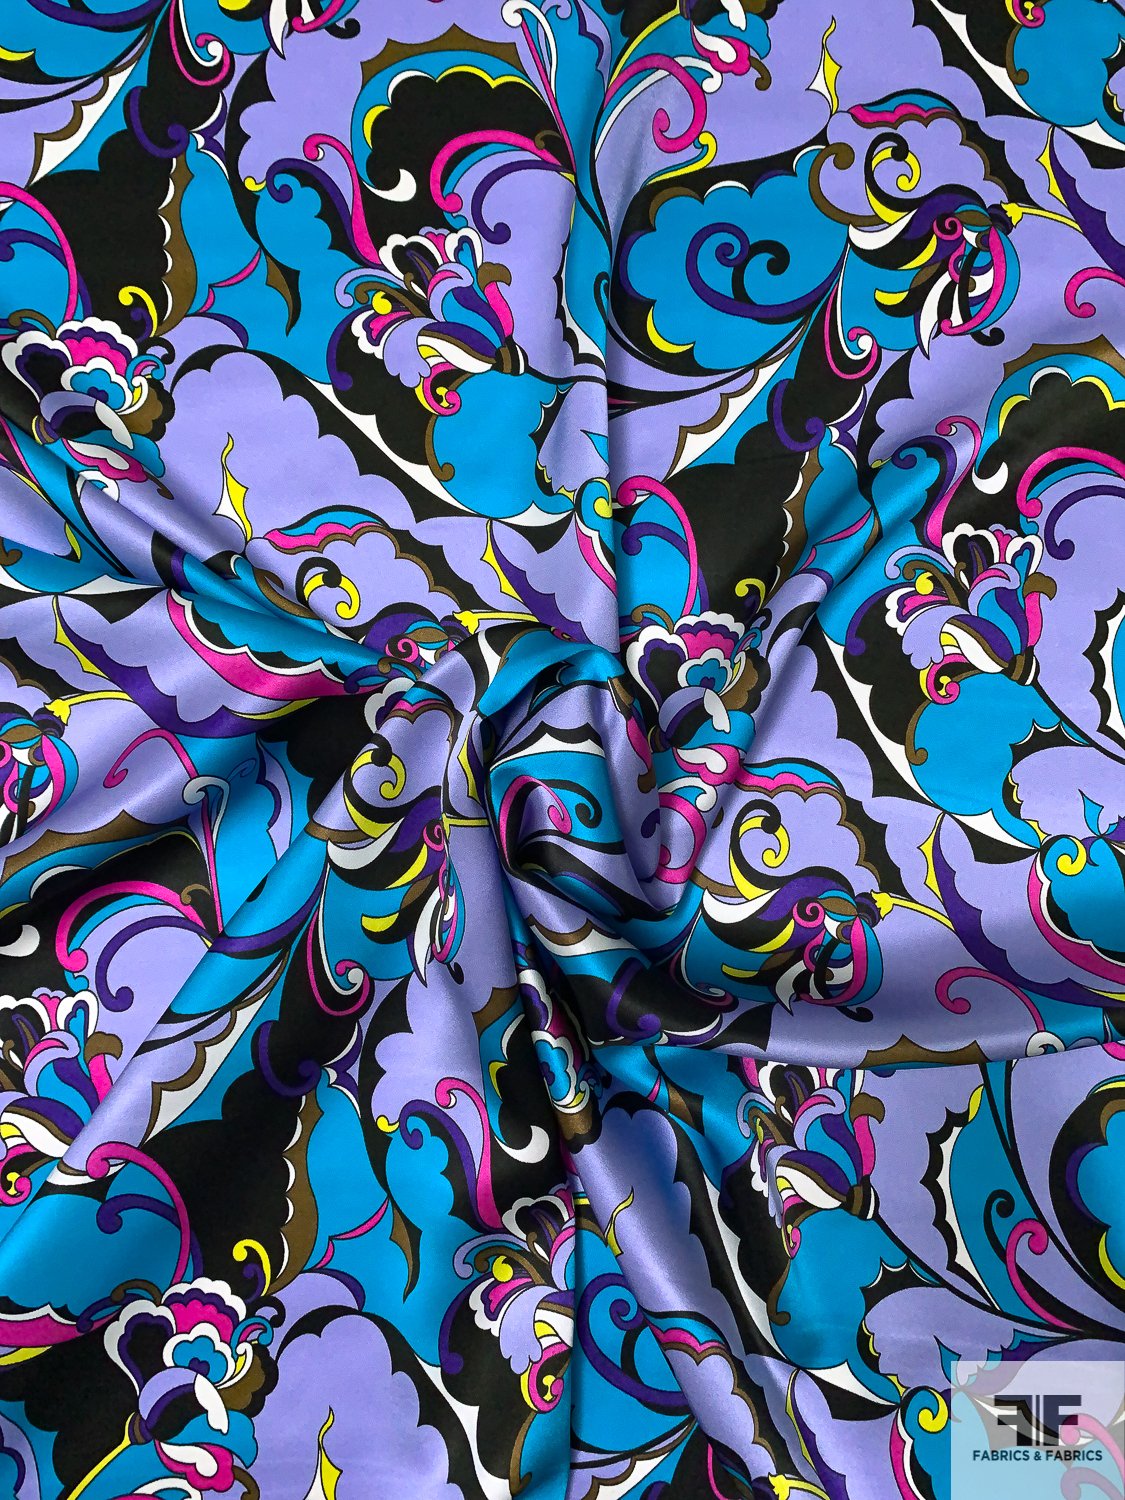 Pucci-esque Paisley-Like Printed Silk Charmeuse - Greys / Magenta / Pink -  Fabric by the Yard